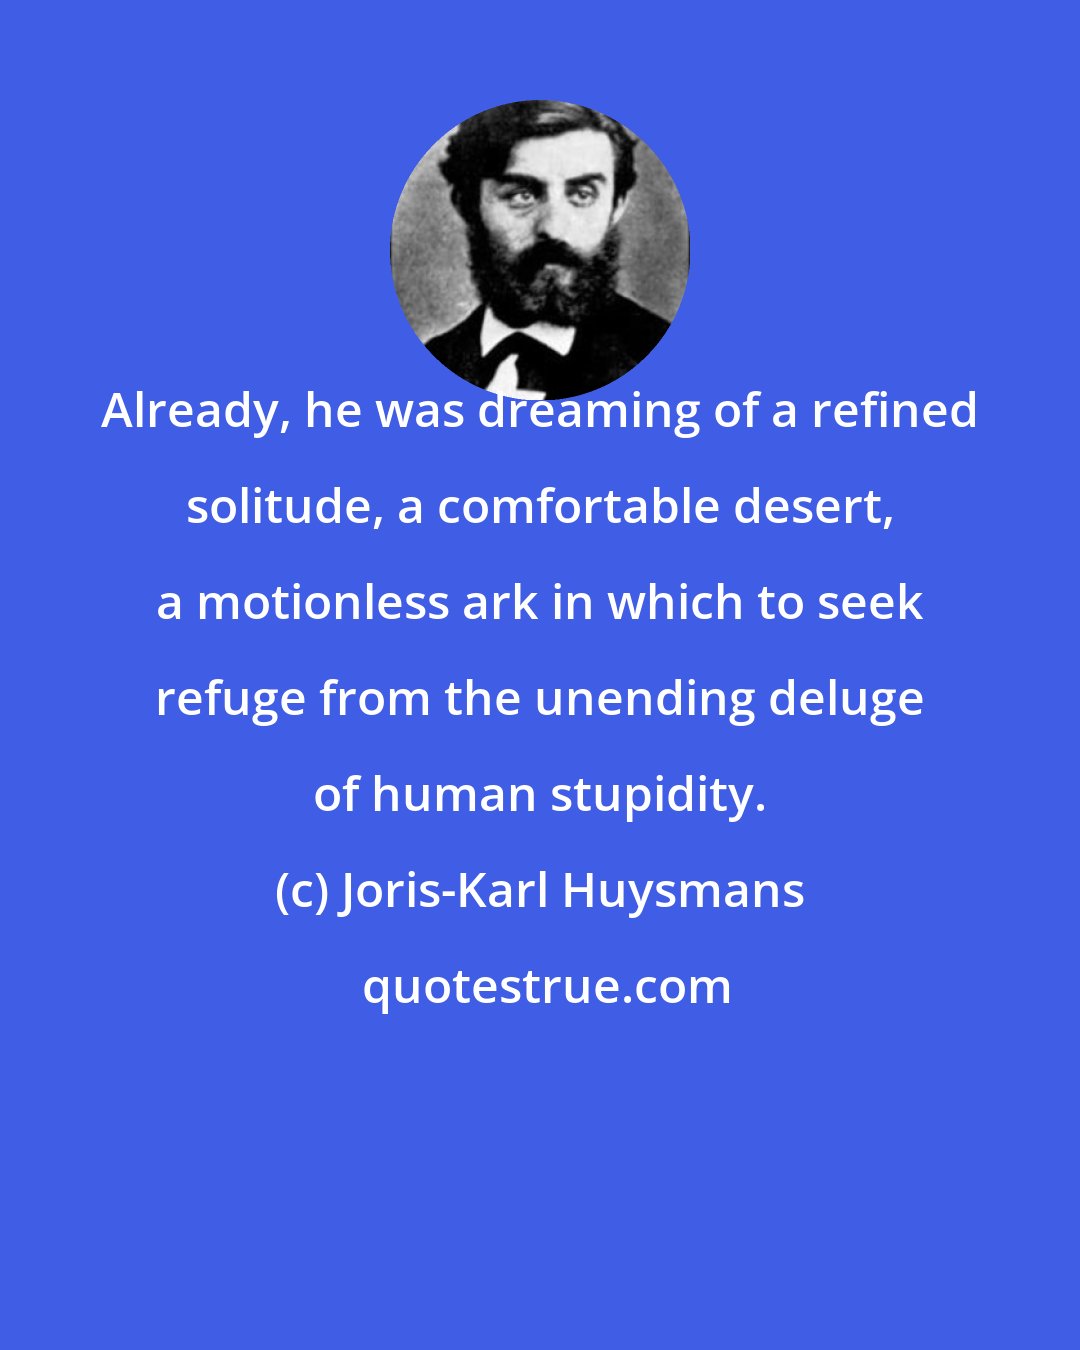 Joris-Karl Huysmans: Already, he was dreaming of a refined solitude, a comfortable desert, a motionless ark in which to seek refuge from the unending deluge of human stupidity.